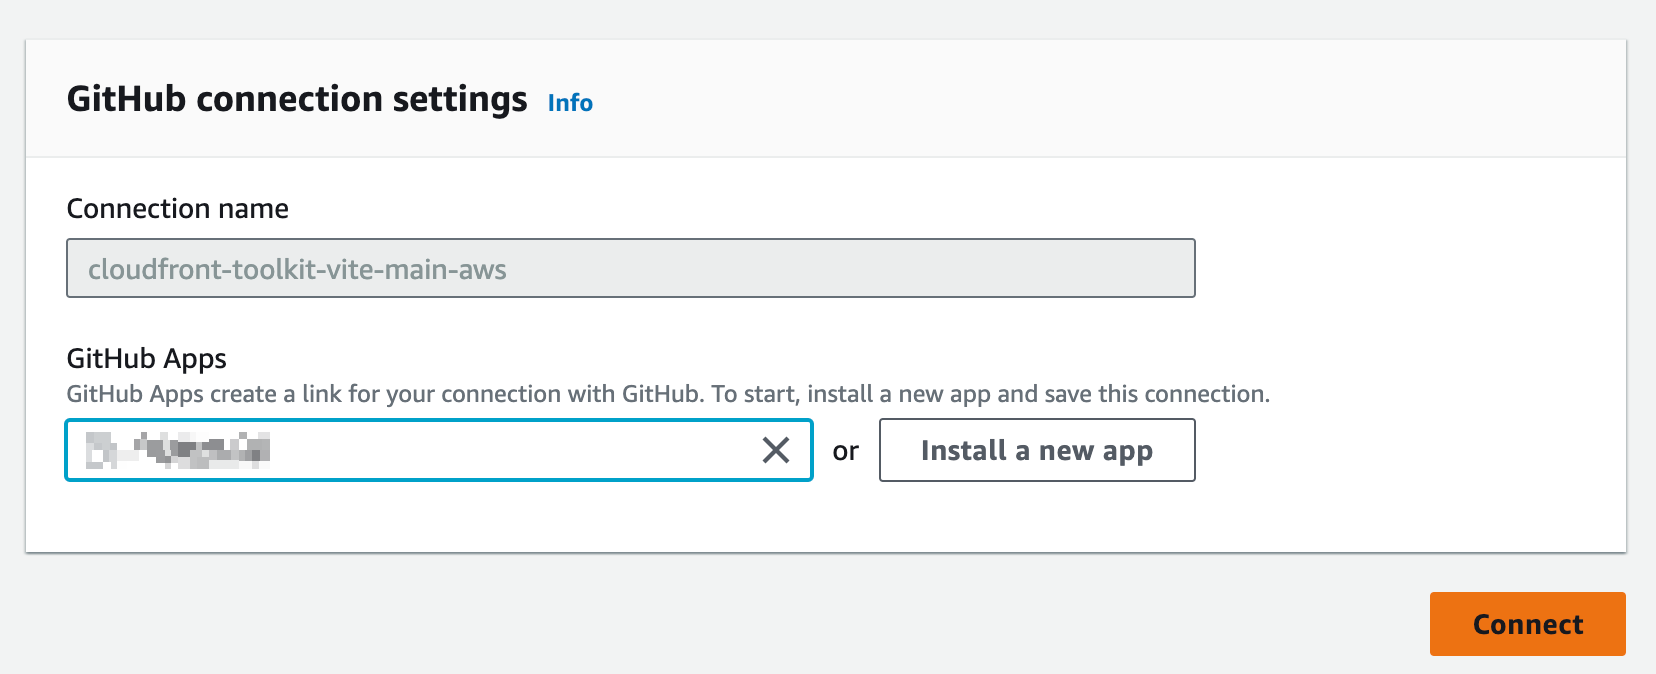 Screenshot of the GitHub connection settings interface. It includes fields for "Connection name" and "GitHub Apps," with options to install a new app or connect. There is an orange "Connect" button at the bottom right.